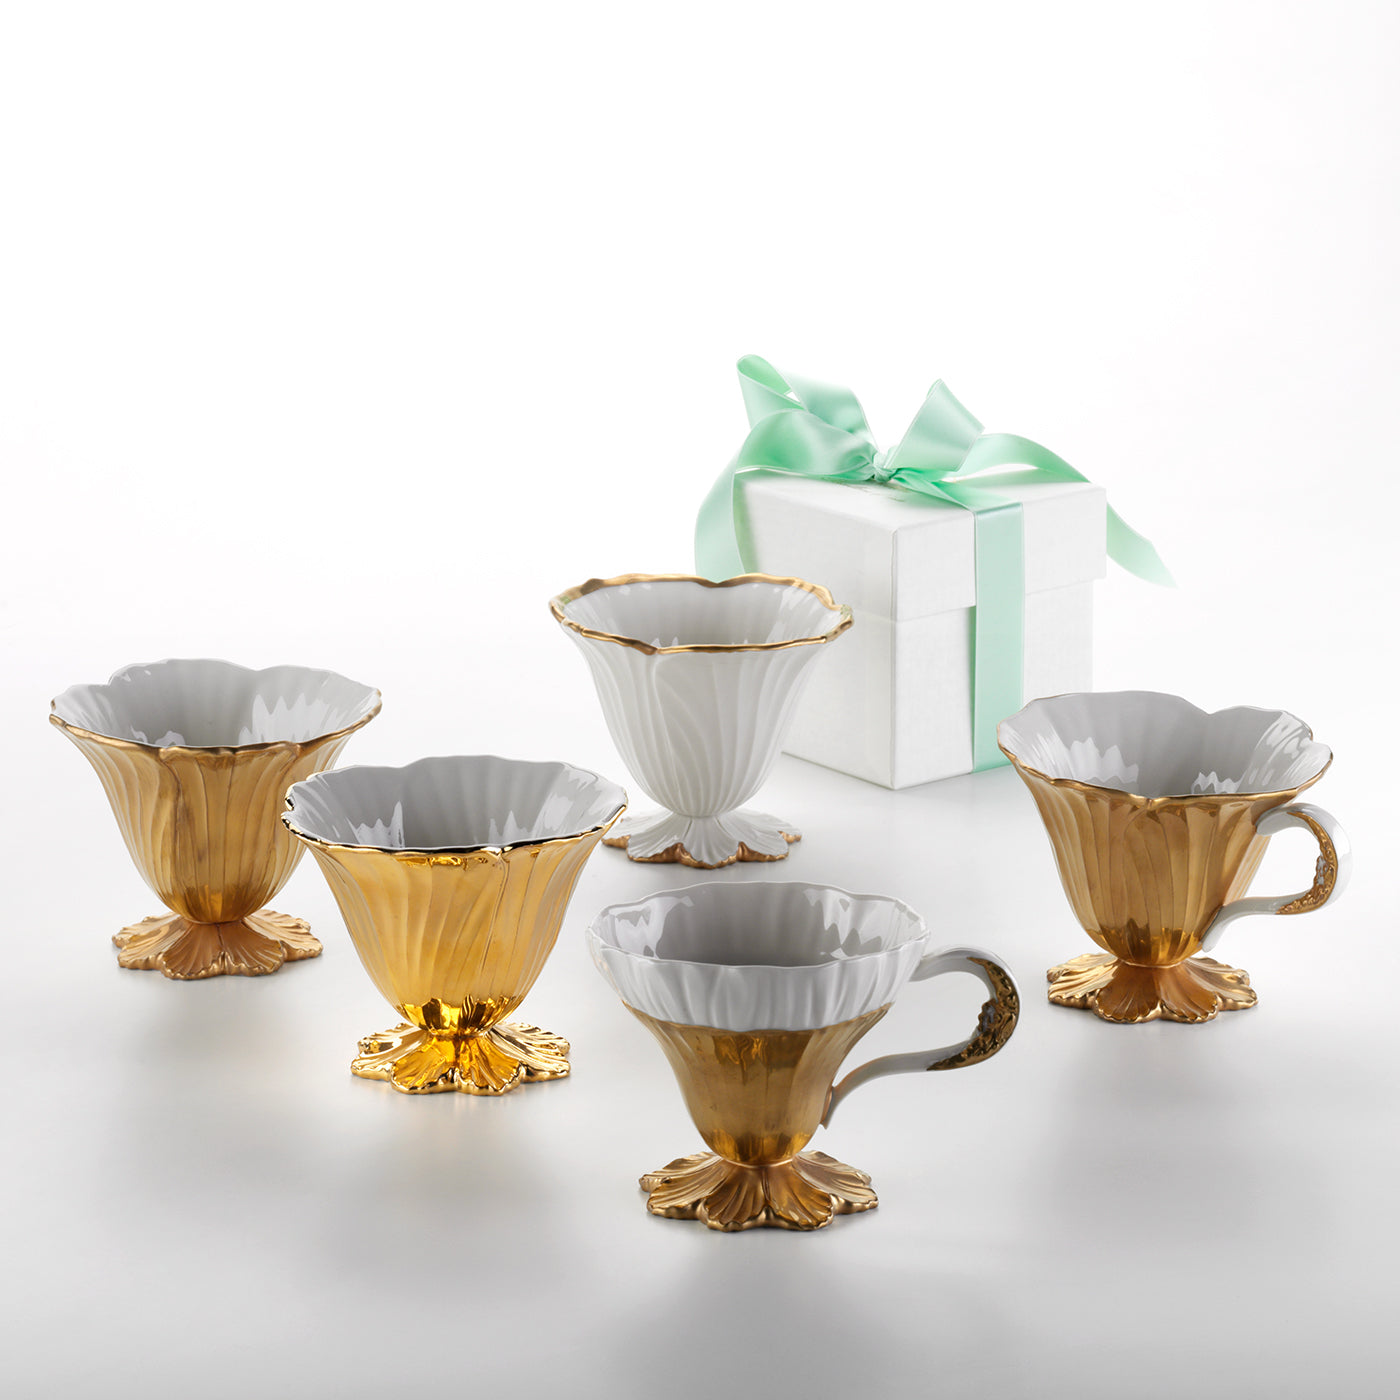 Gold Flower Cup - Alternative view 1